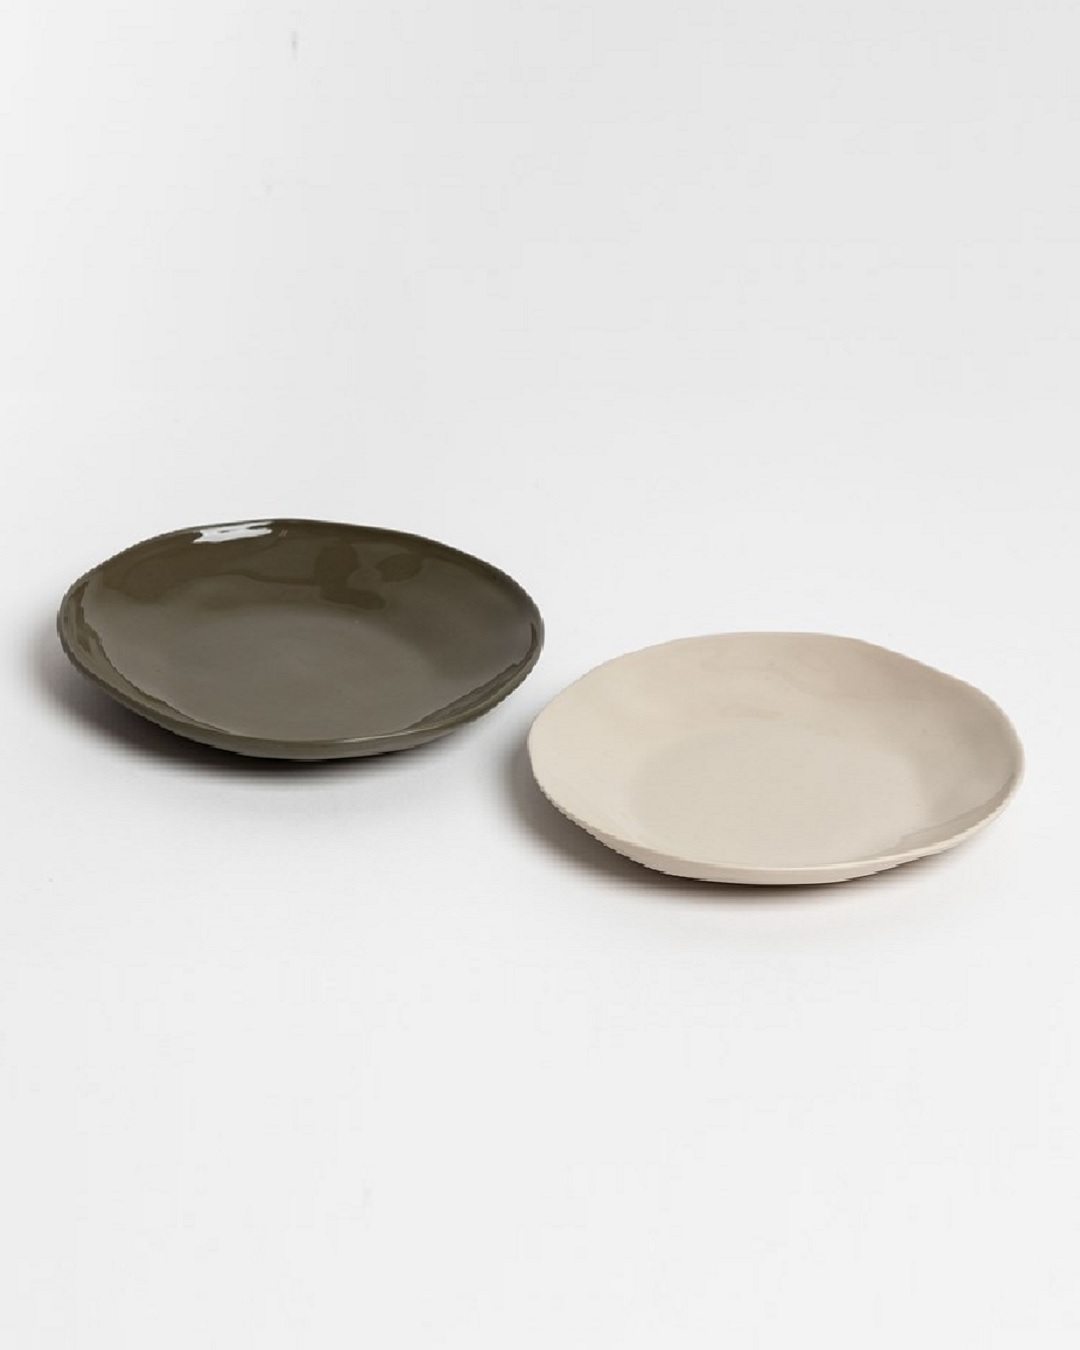 Olive and cashmere plate